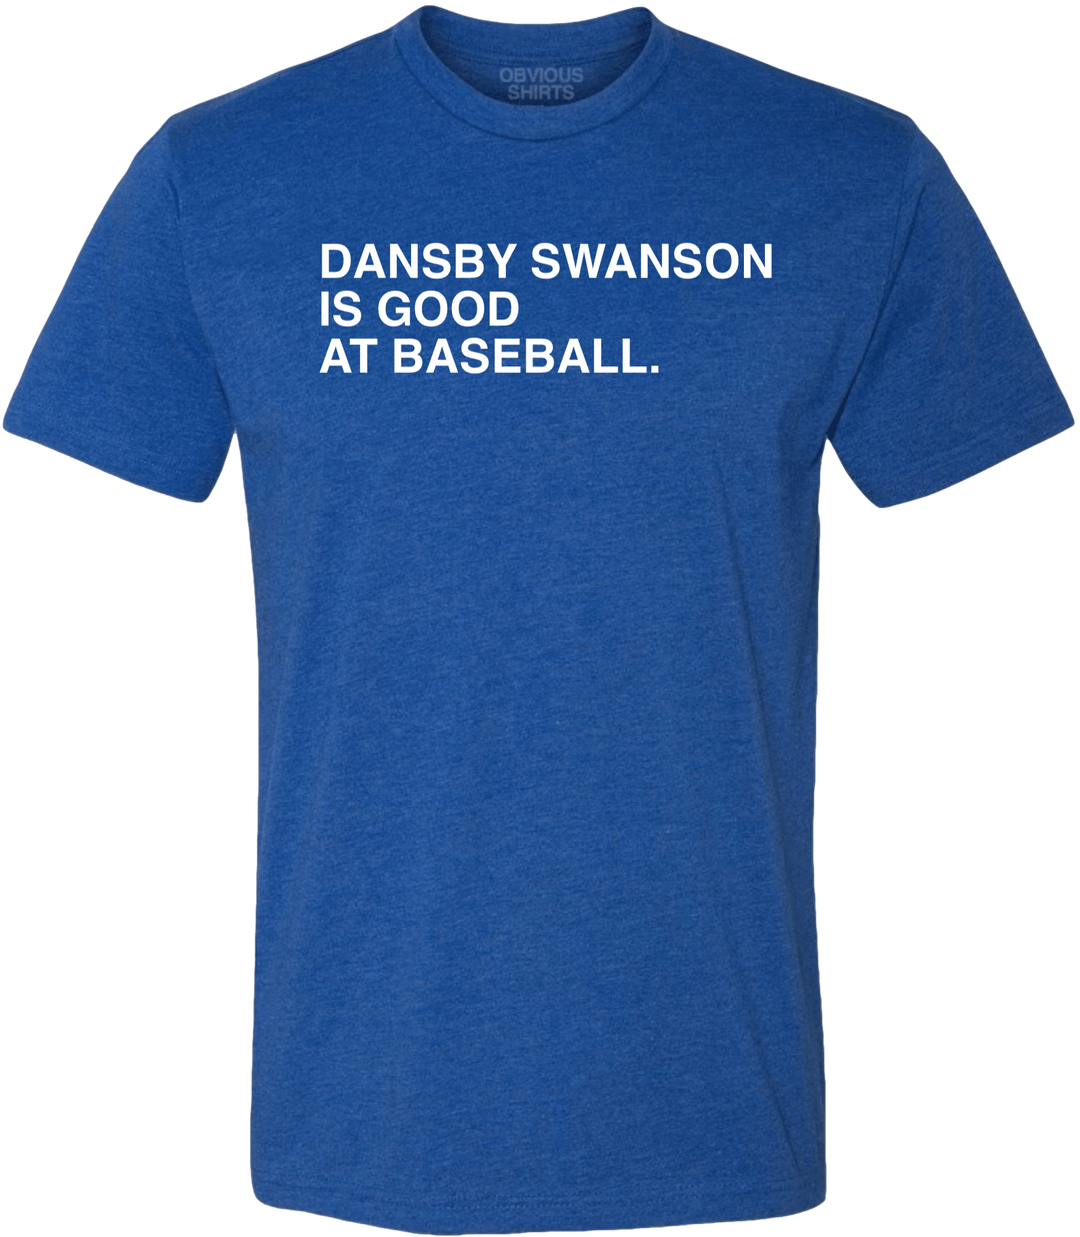 DANSBY SWANSON IS GOOD AT BASEBALL. - OBVIOUS SHIRTS